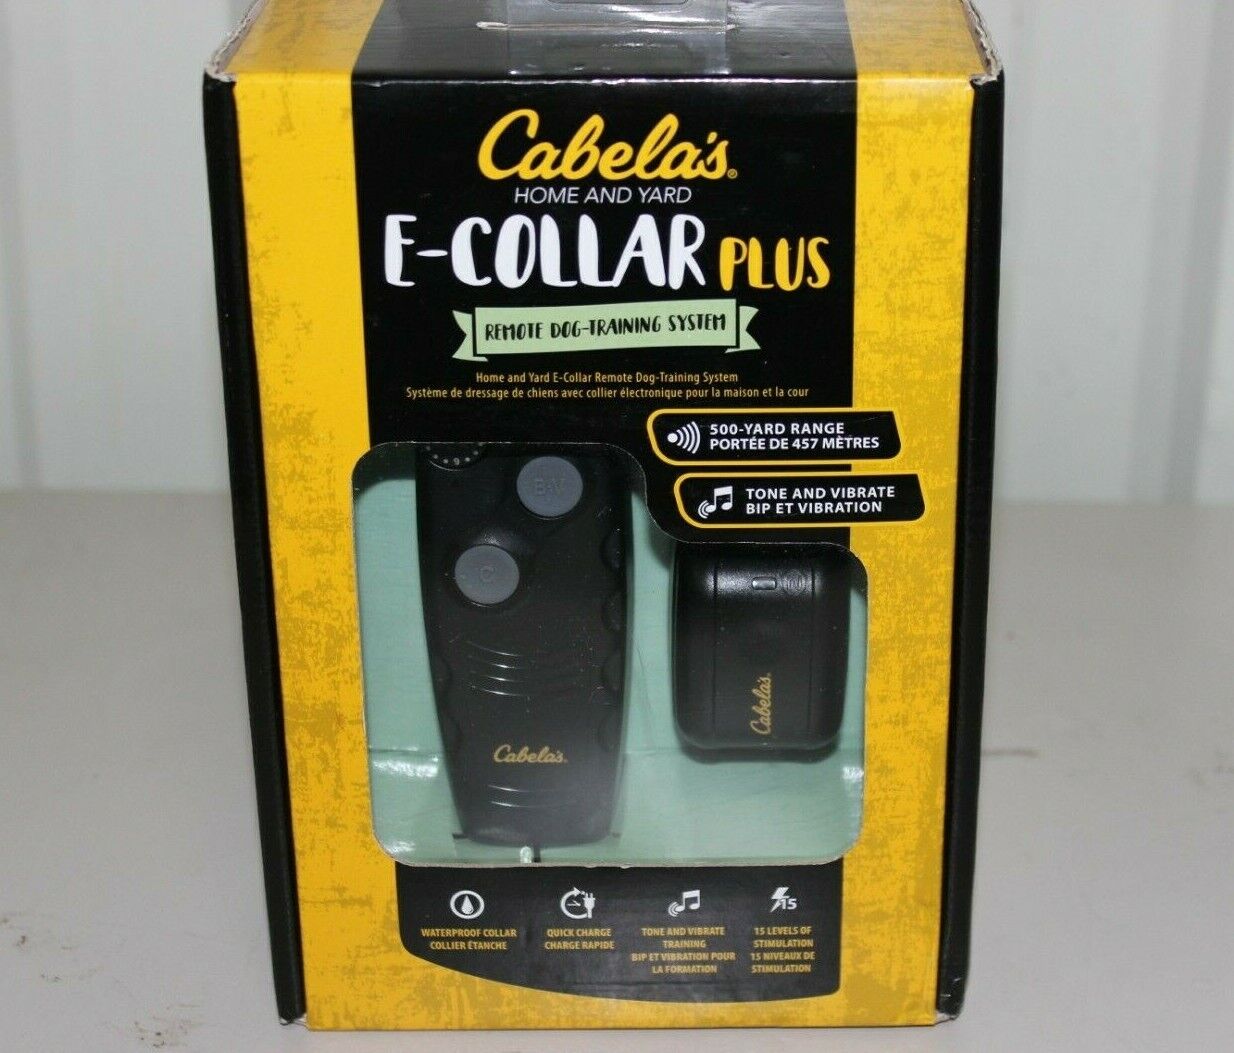 Cabela's CAB500 Bargain E-Collar Plus - Discount is also underway NEW Remote Training System Dog